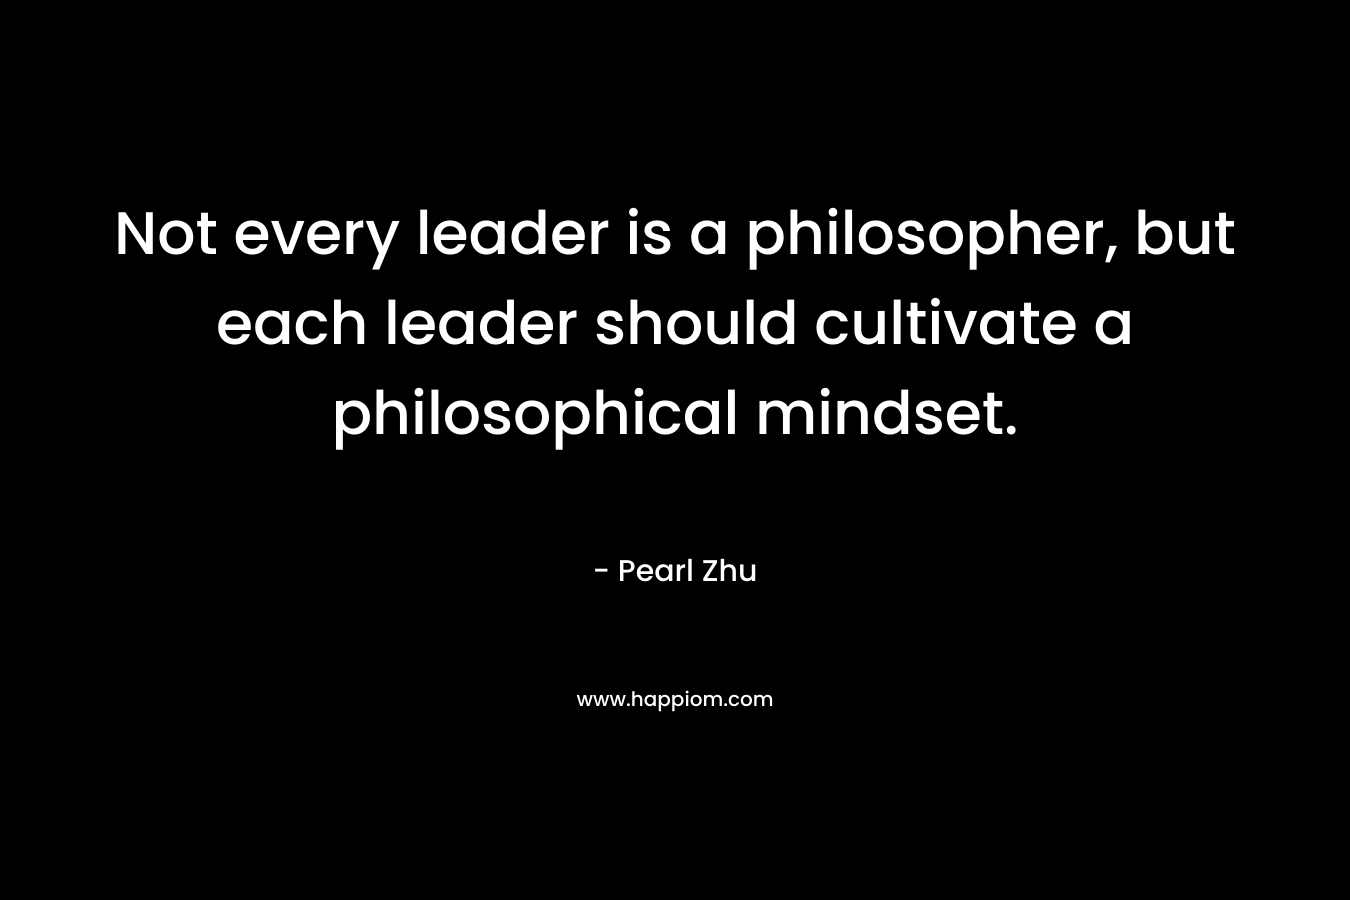 Not every leader is a philosopher, but each leader should cultivate a philosophical mindset. – Pearl Zhu